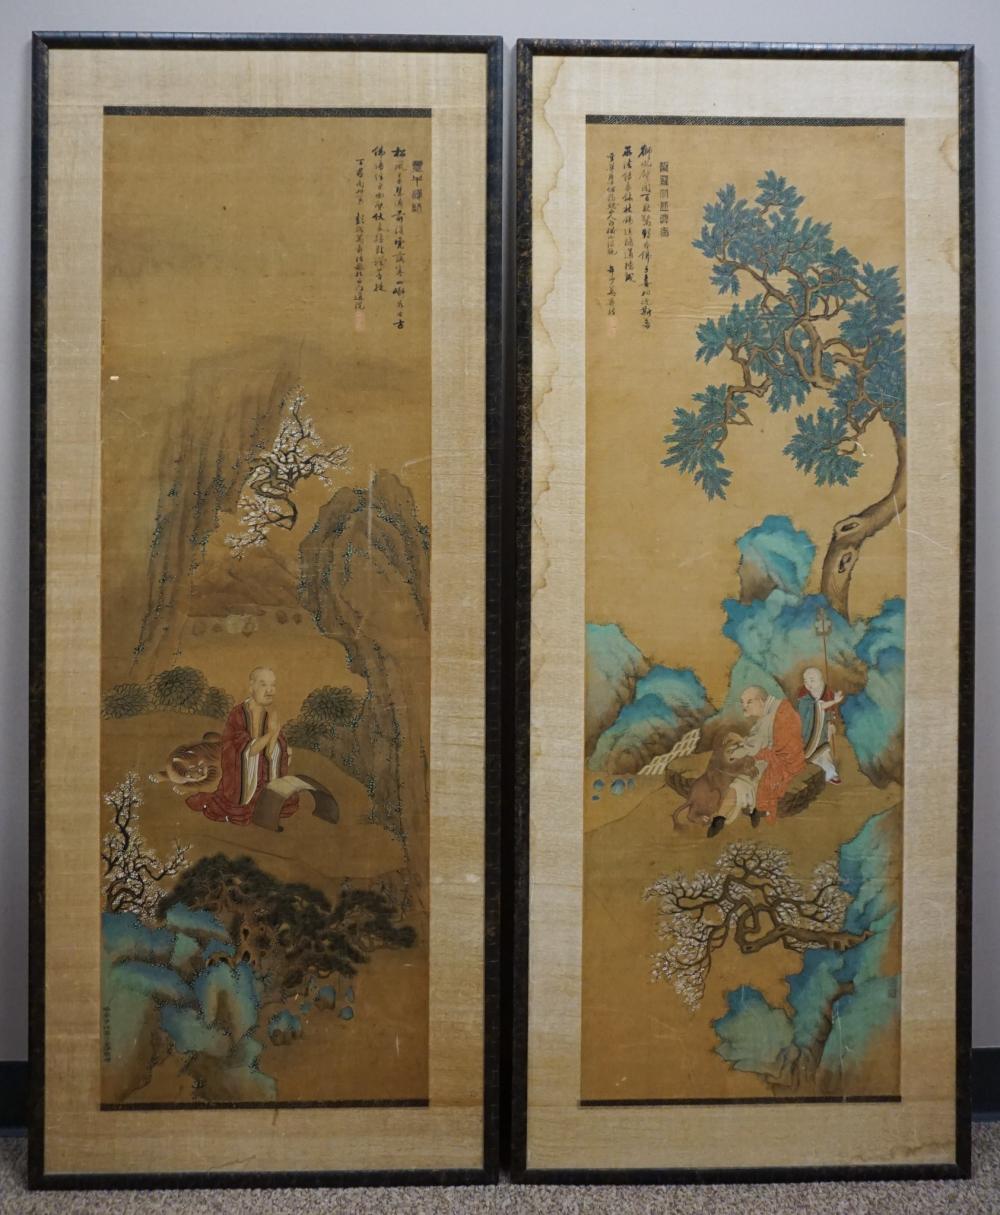 PAIR OF CHINESE HANGING SCROLLS 32c1e7